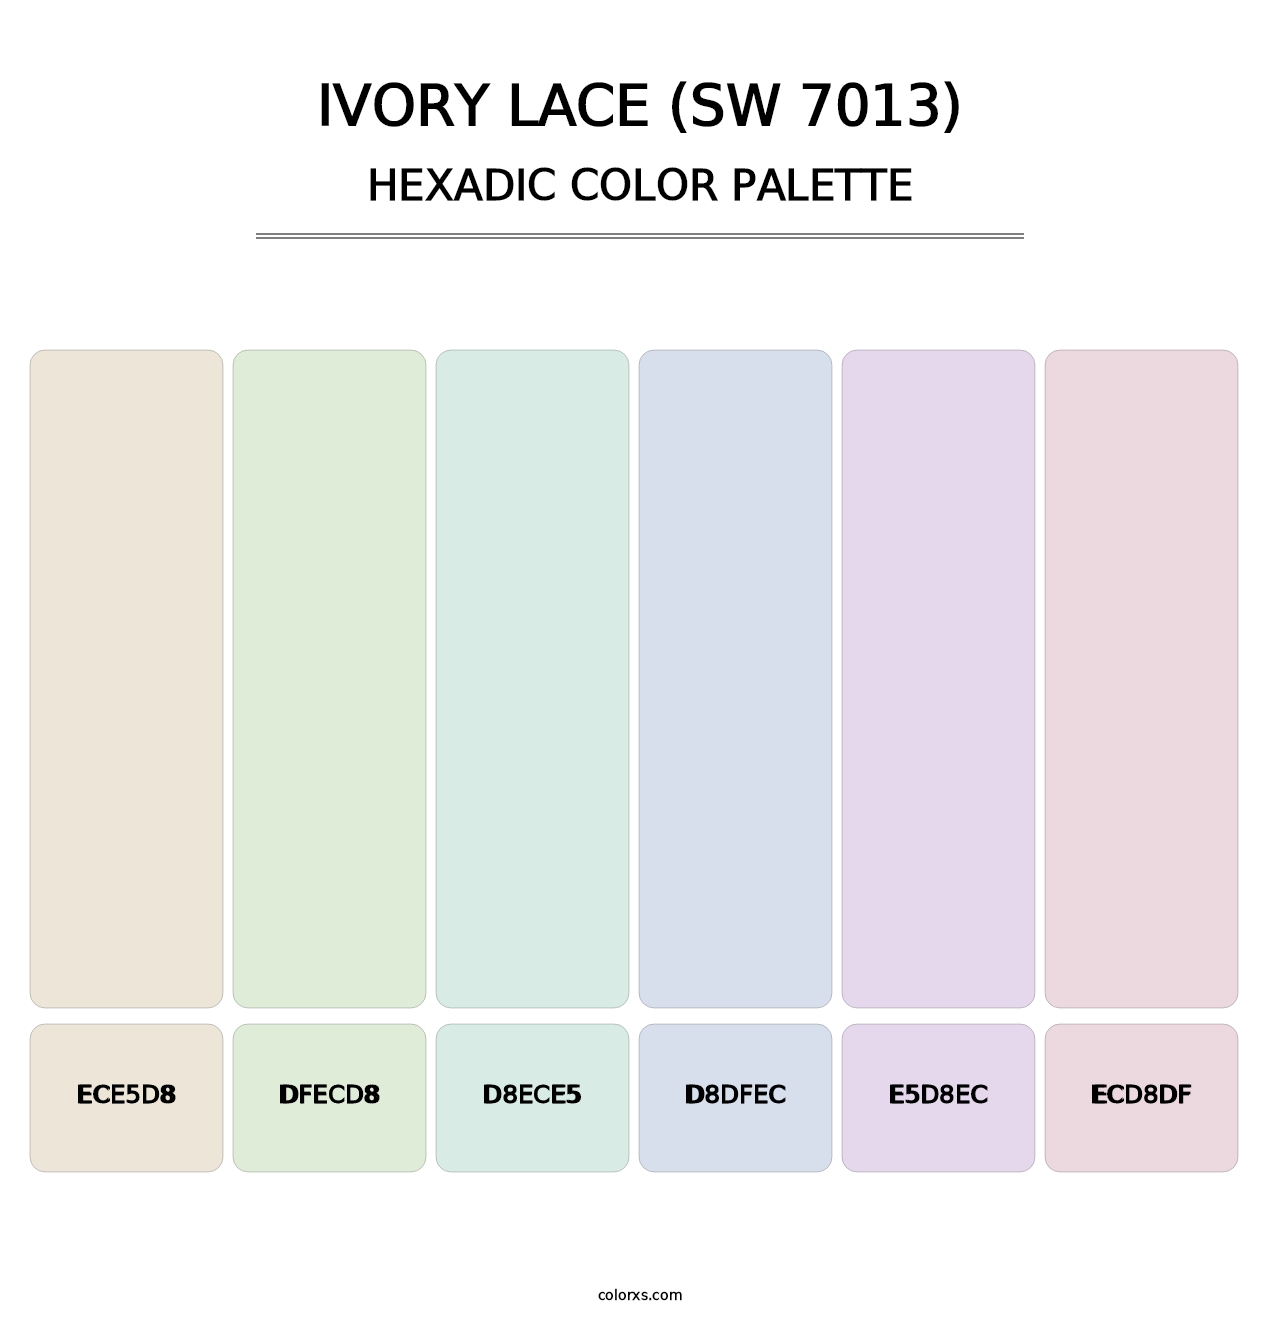 Ivory Lace (SW 7013) - Hexadic Color Palette